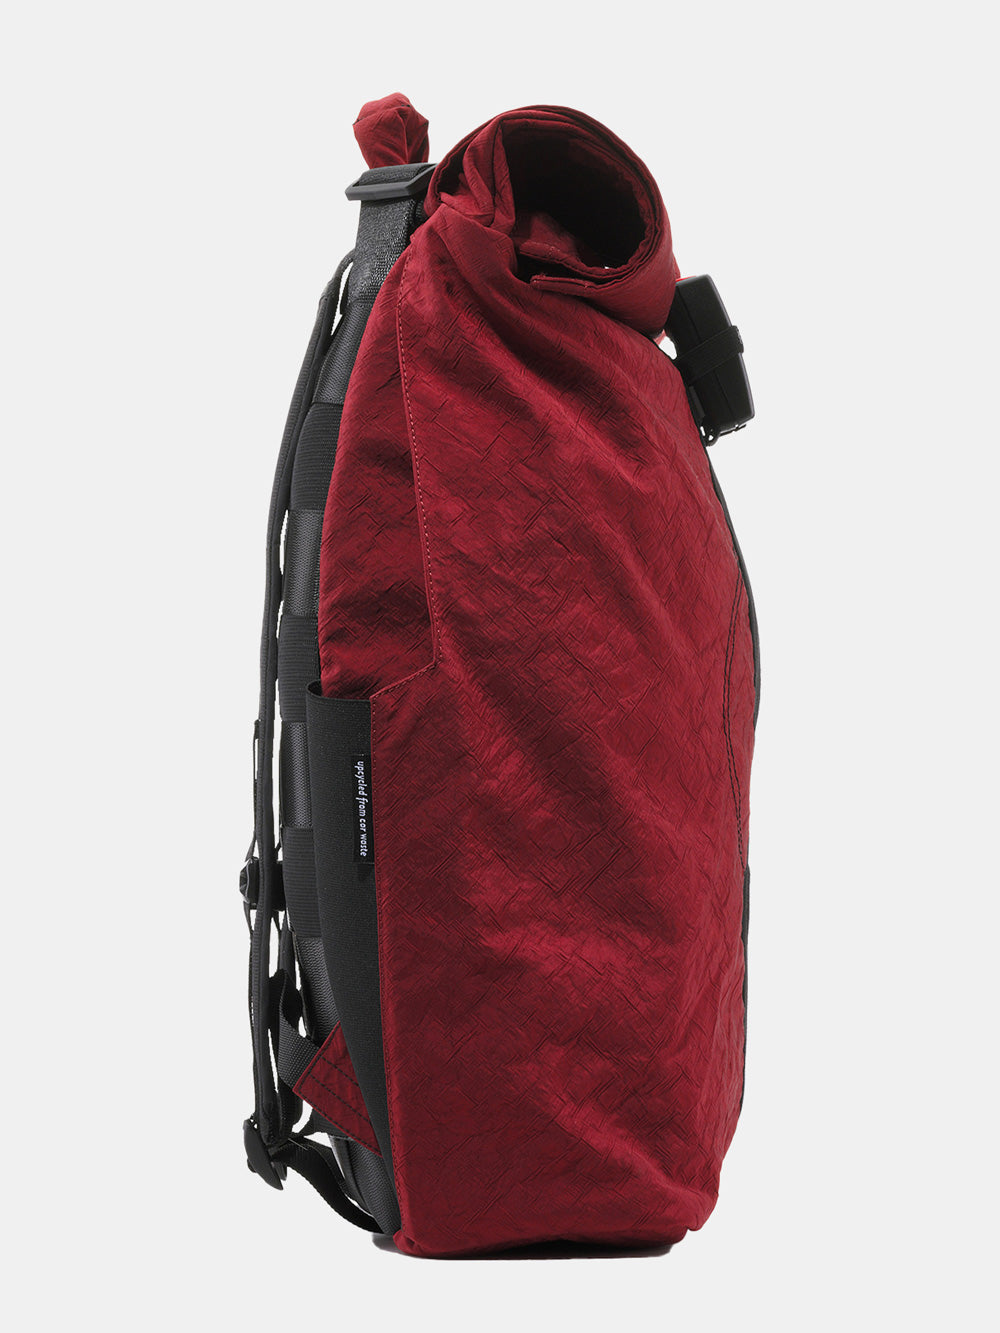 Airpaq Backpack Rolltop BIQ - colored red 